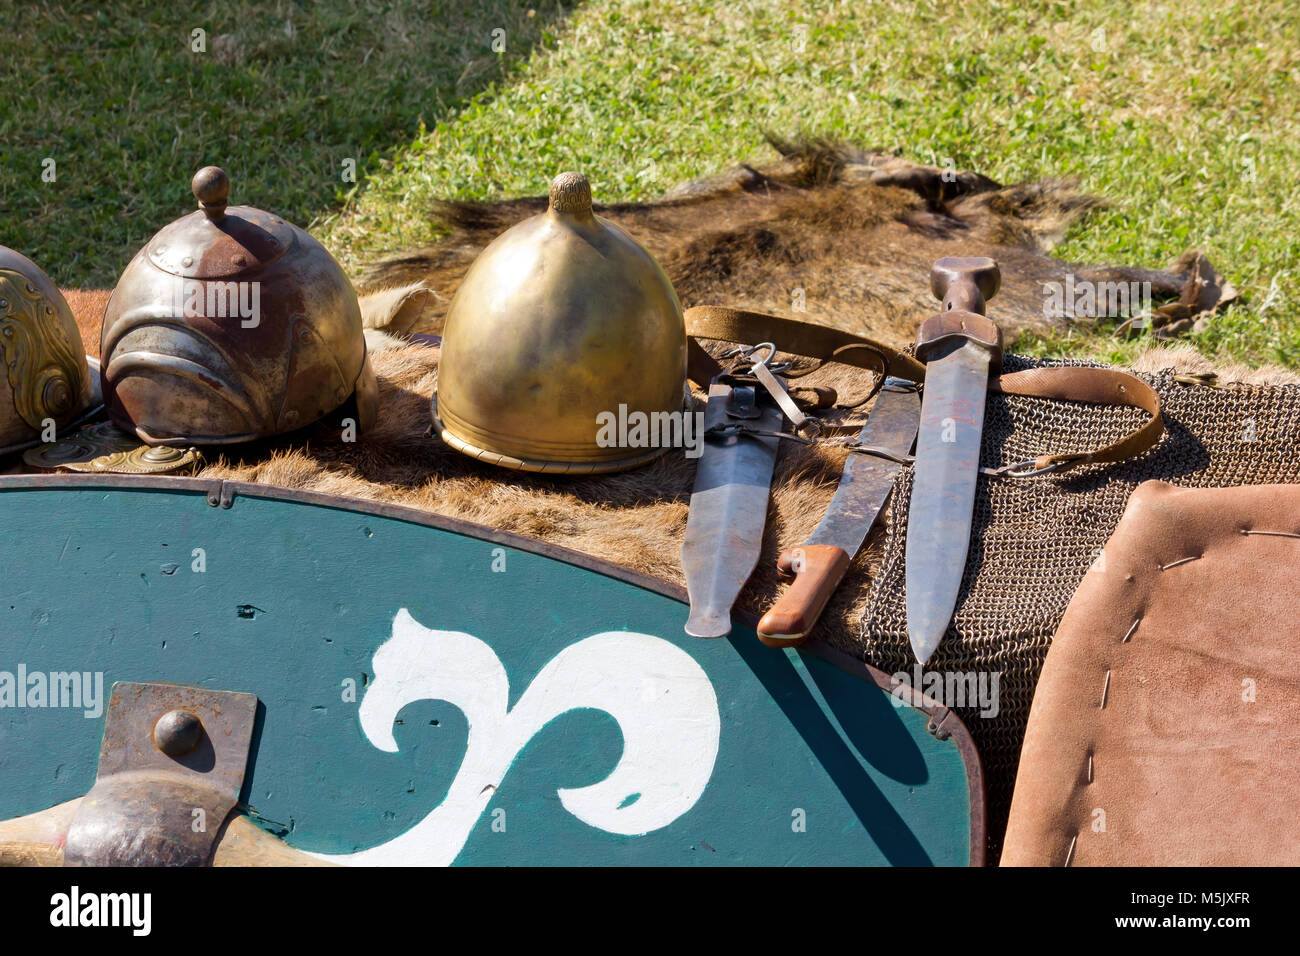 Ancient gallic helmets, shield and daggers at a historical reenactment Stock Photo